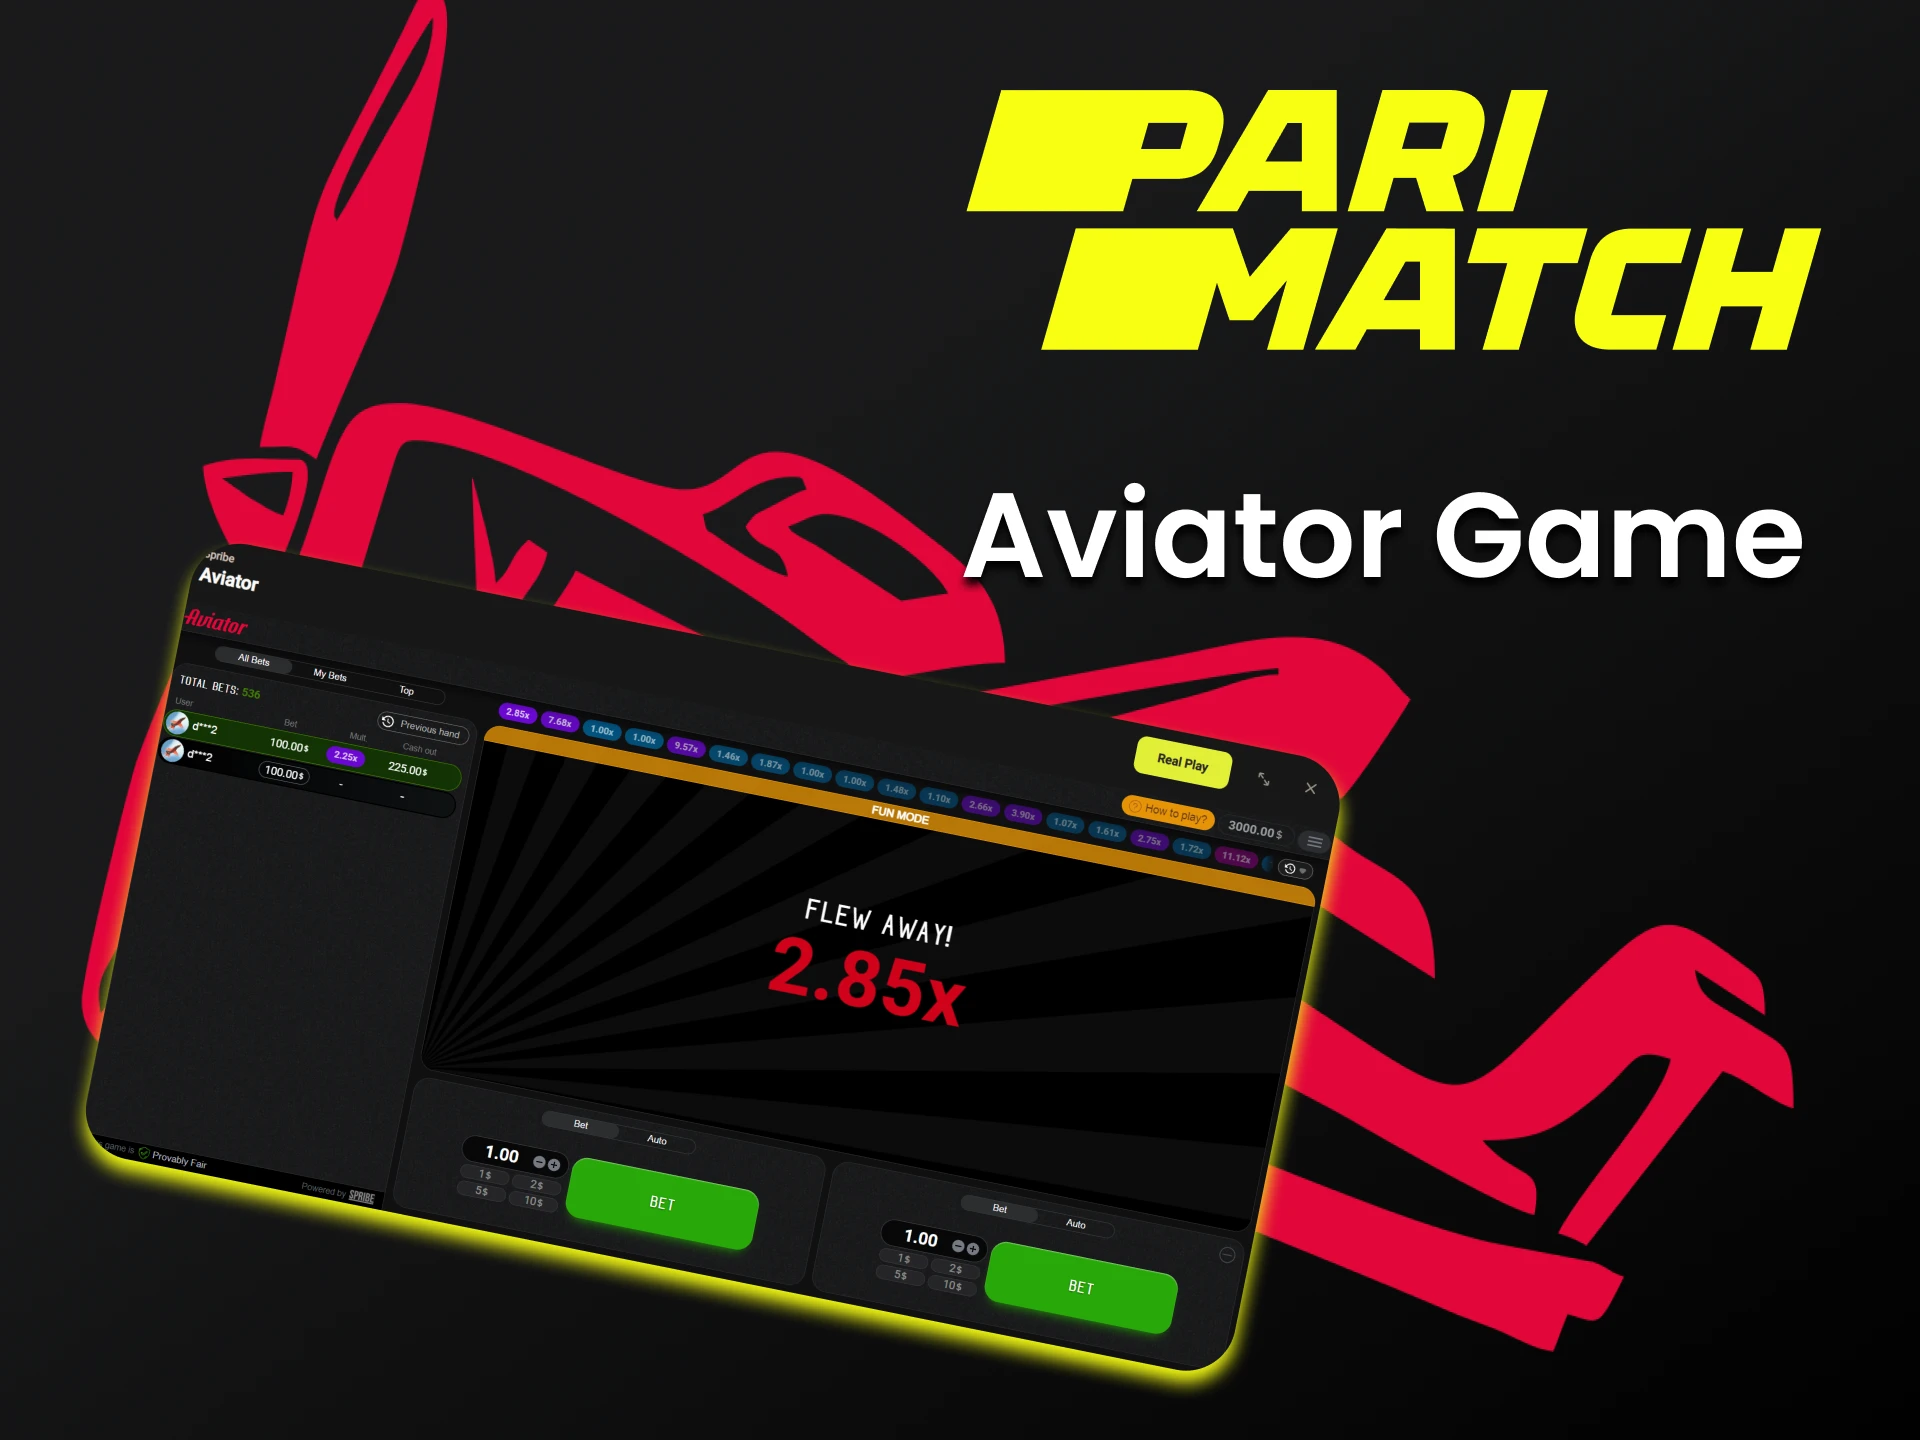 On the Parimatch platform, you can try your hand at the Aviator game.